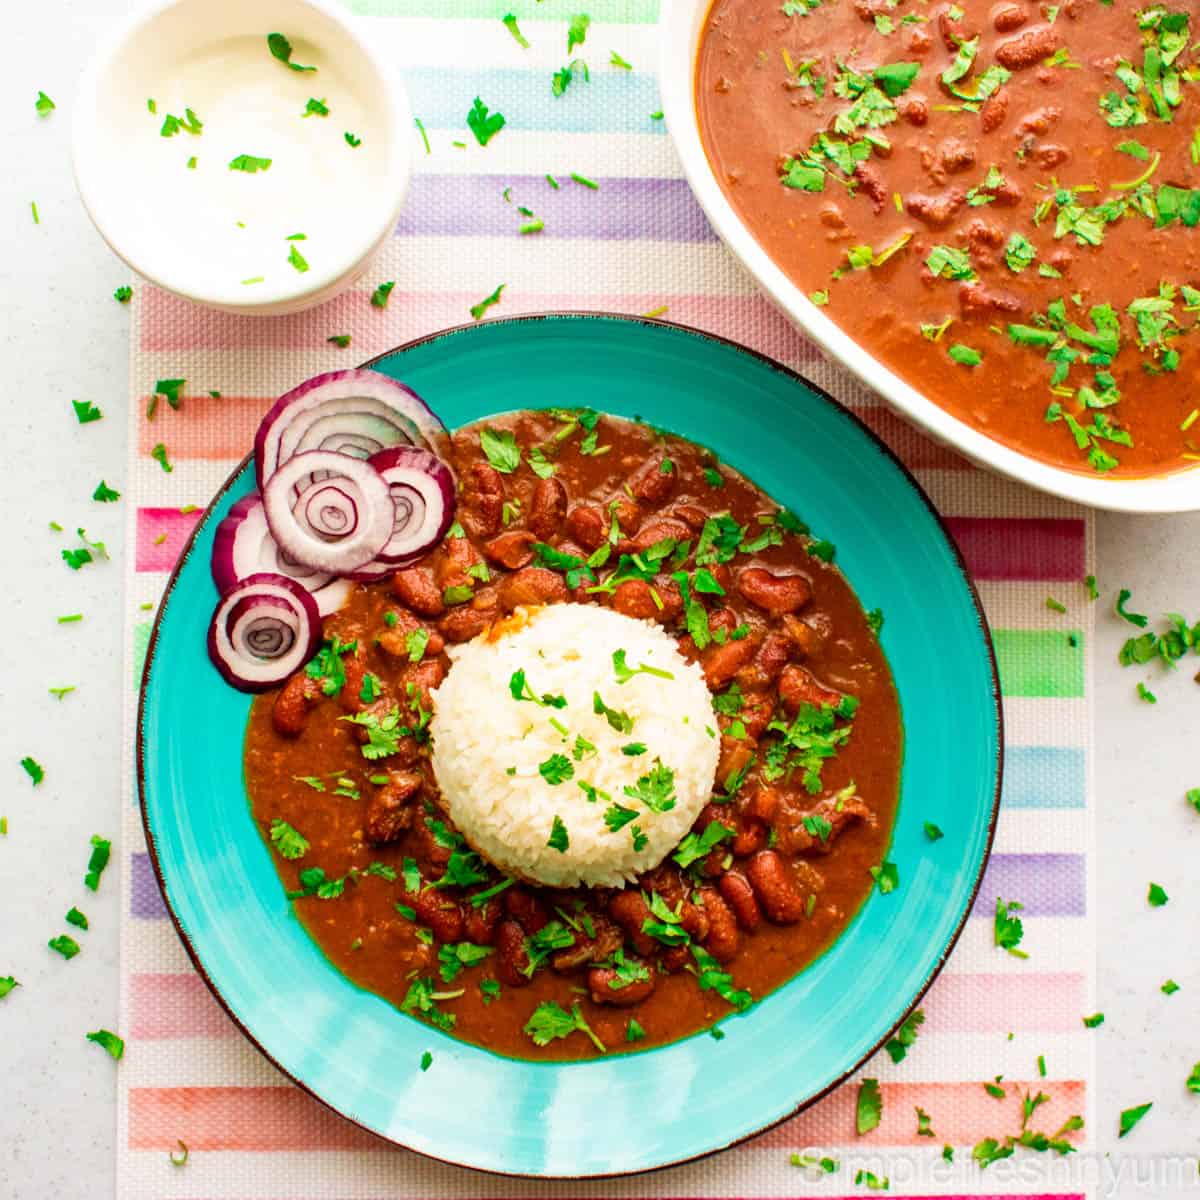 Rajma served in a blue plate with white rice and raw onion rings. There is a bowl of yogurt on the side and a white serving bowl full of Rajma. Cilantro is garnished on top